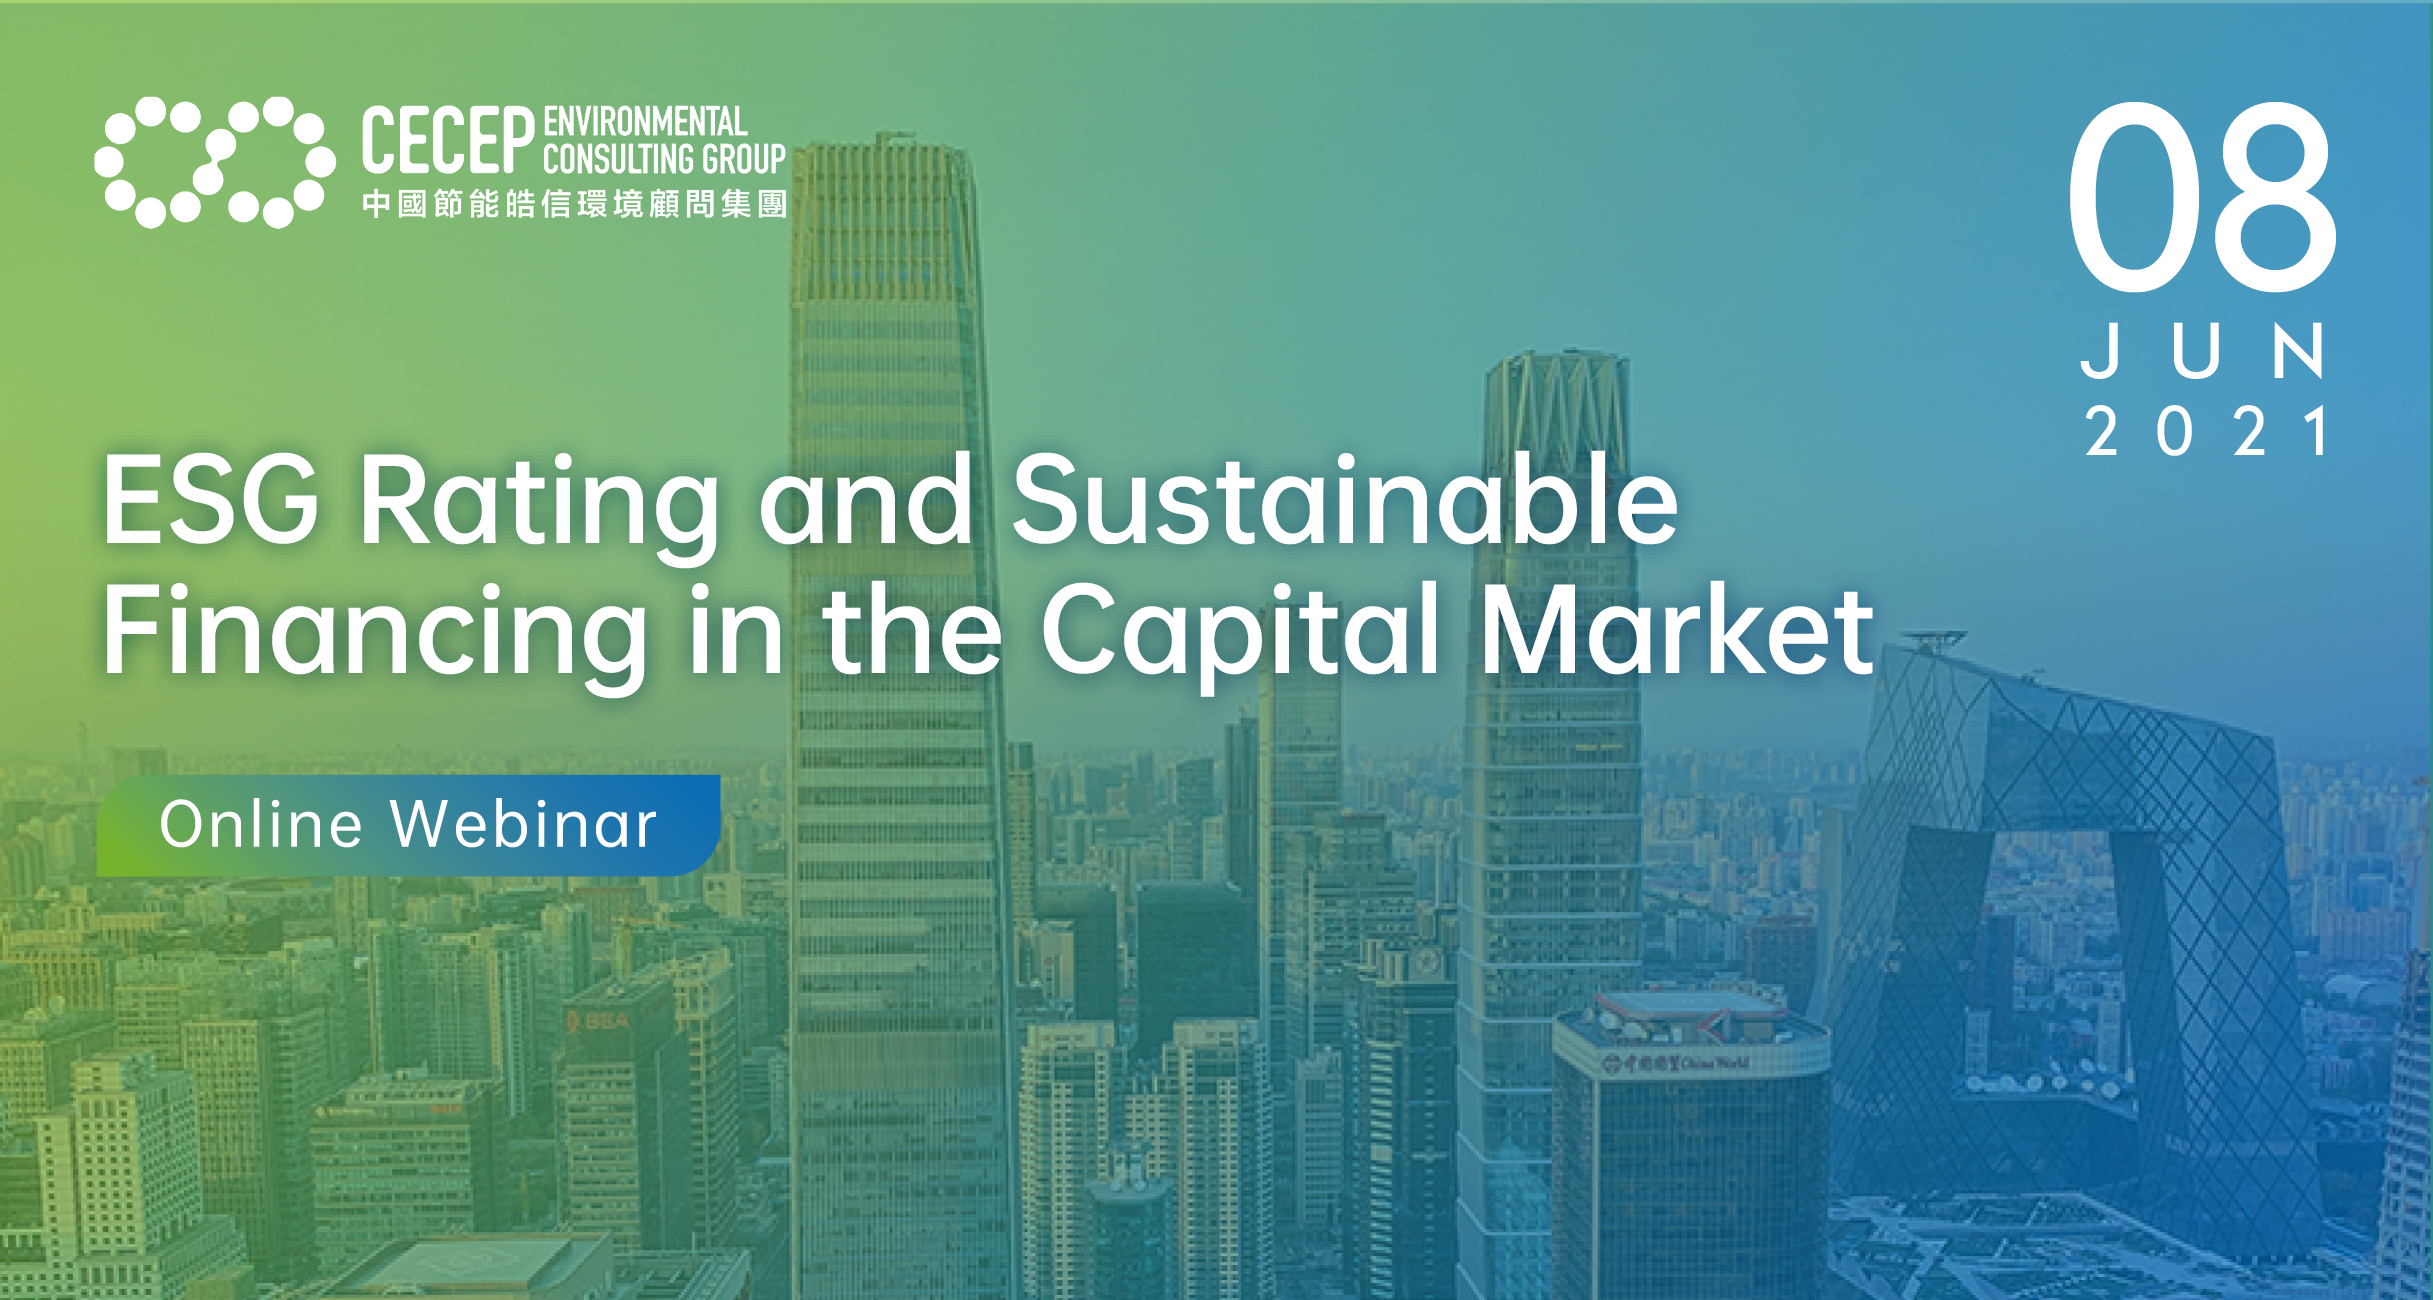 【Online Webinar】ESG Rating and Sustainable Financing in the Capital Market 